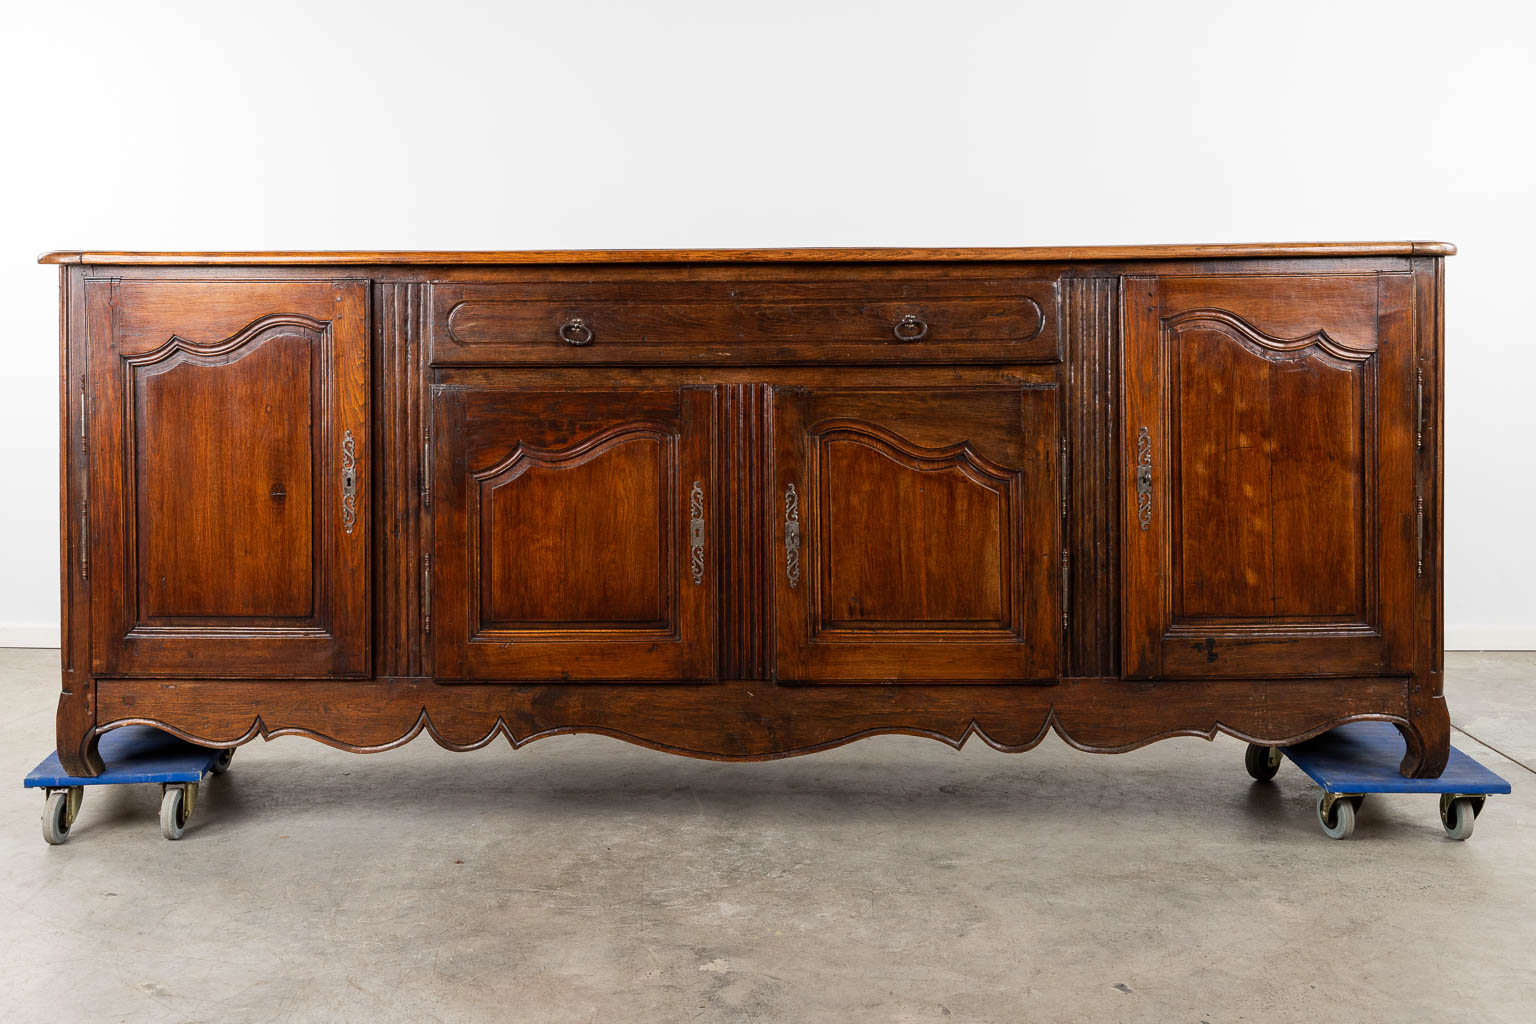 An antique sideboard with 4 doors and a drawer, 18th C. (D:64 x W:281 x H:105 cm)